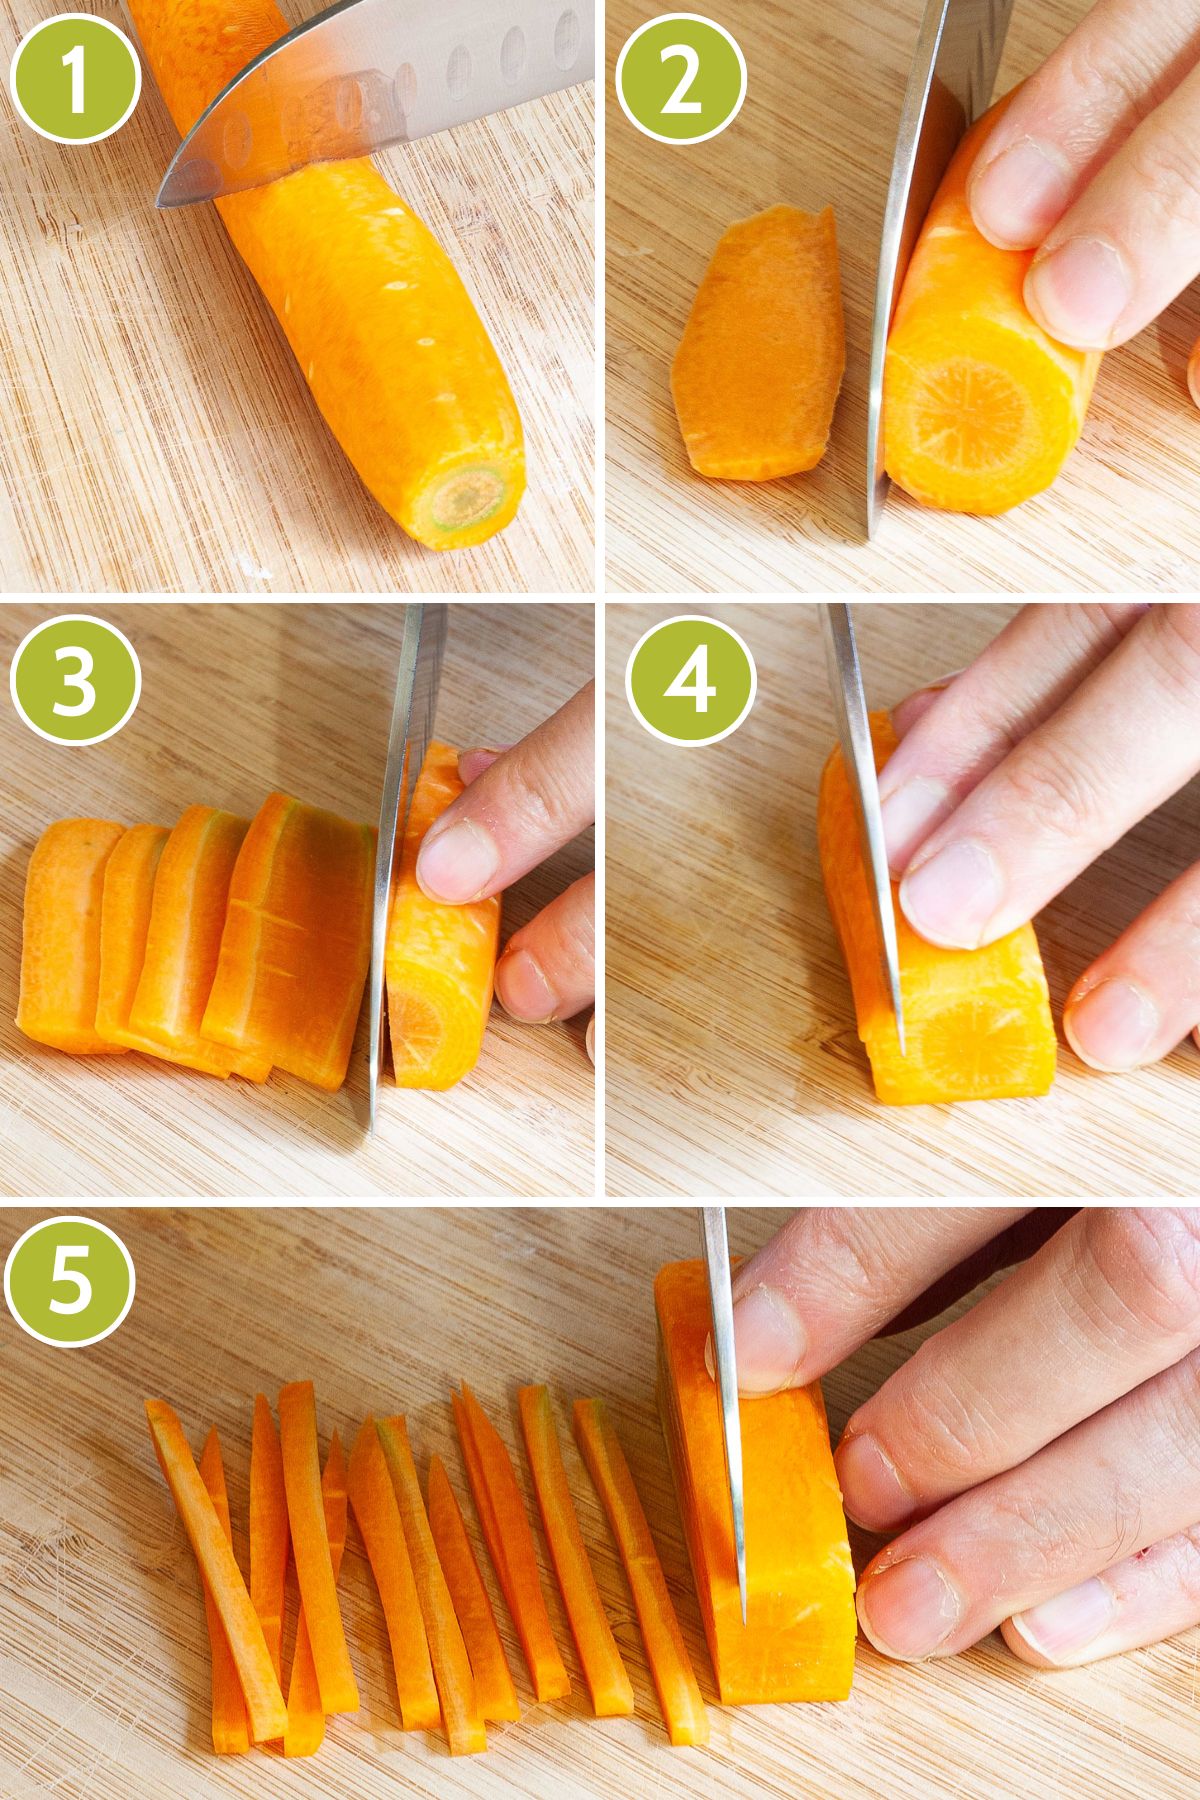 6 photo collage showing a carrot and a hand holding a knife and cutting the carrot into matchsticks